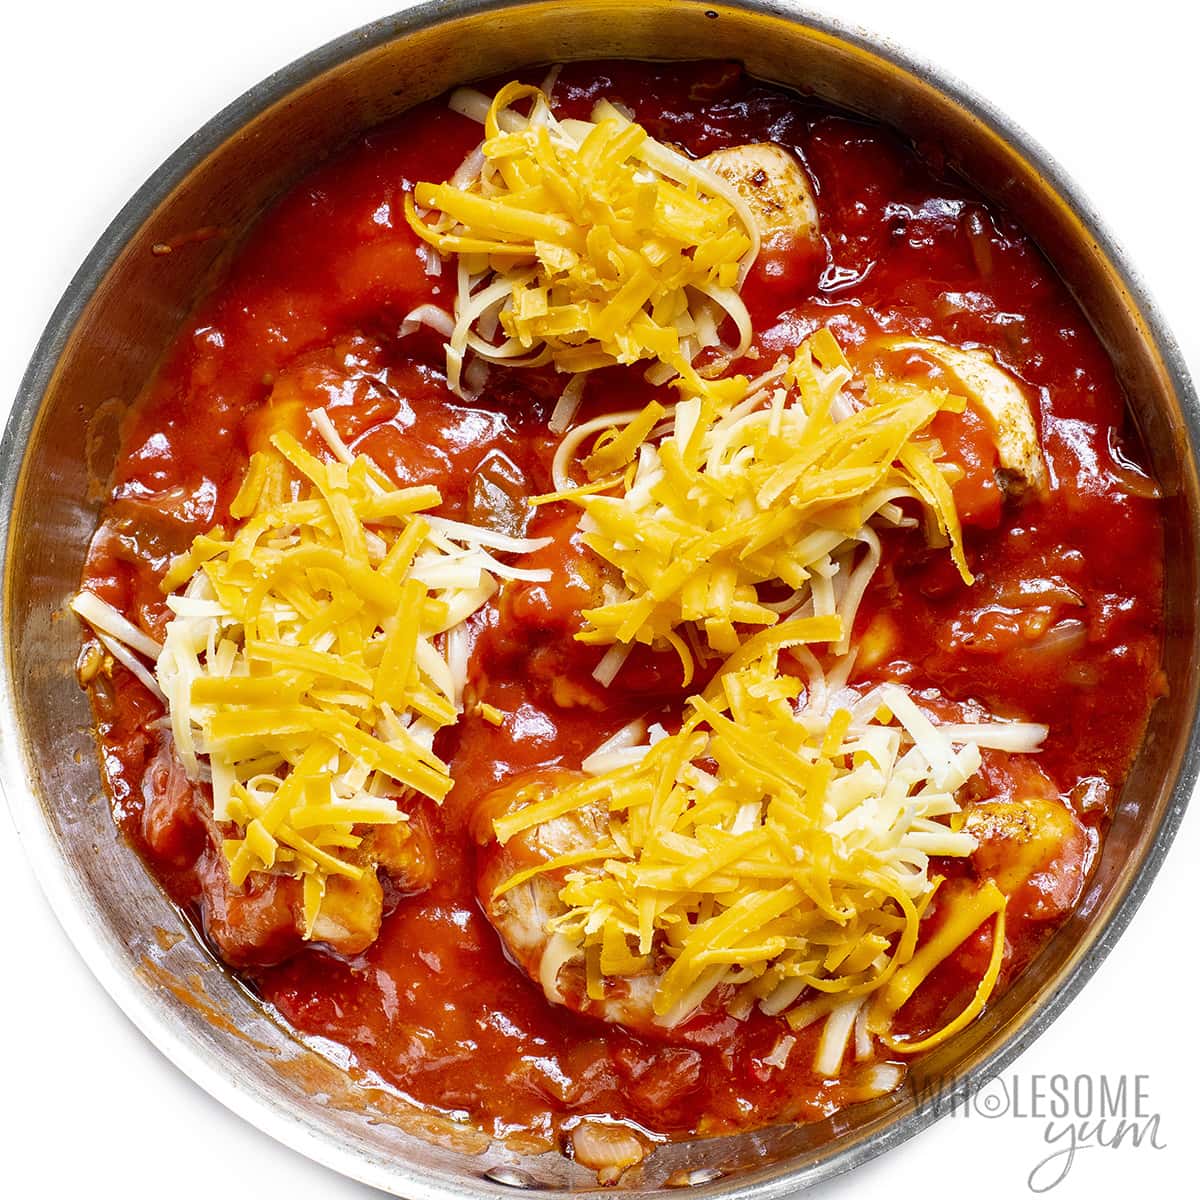 Chicken with salsa and cheese.